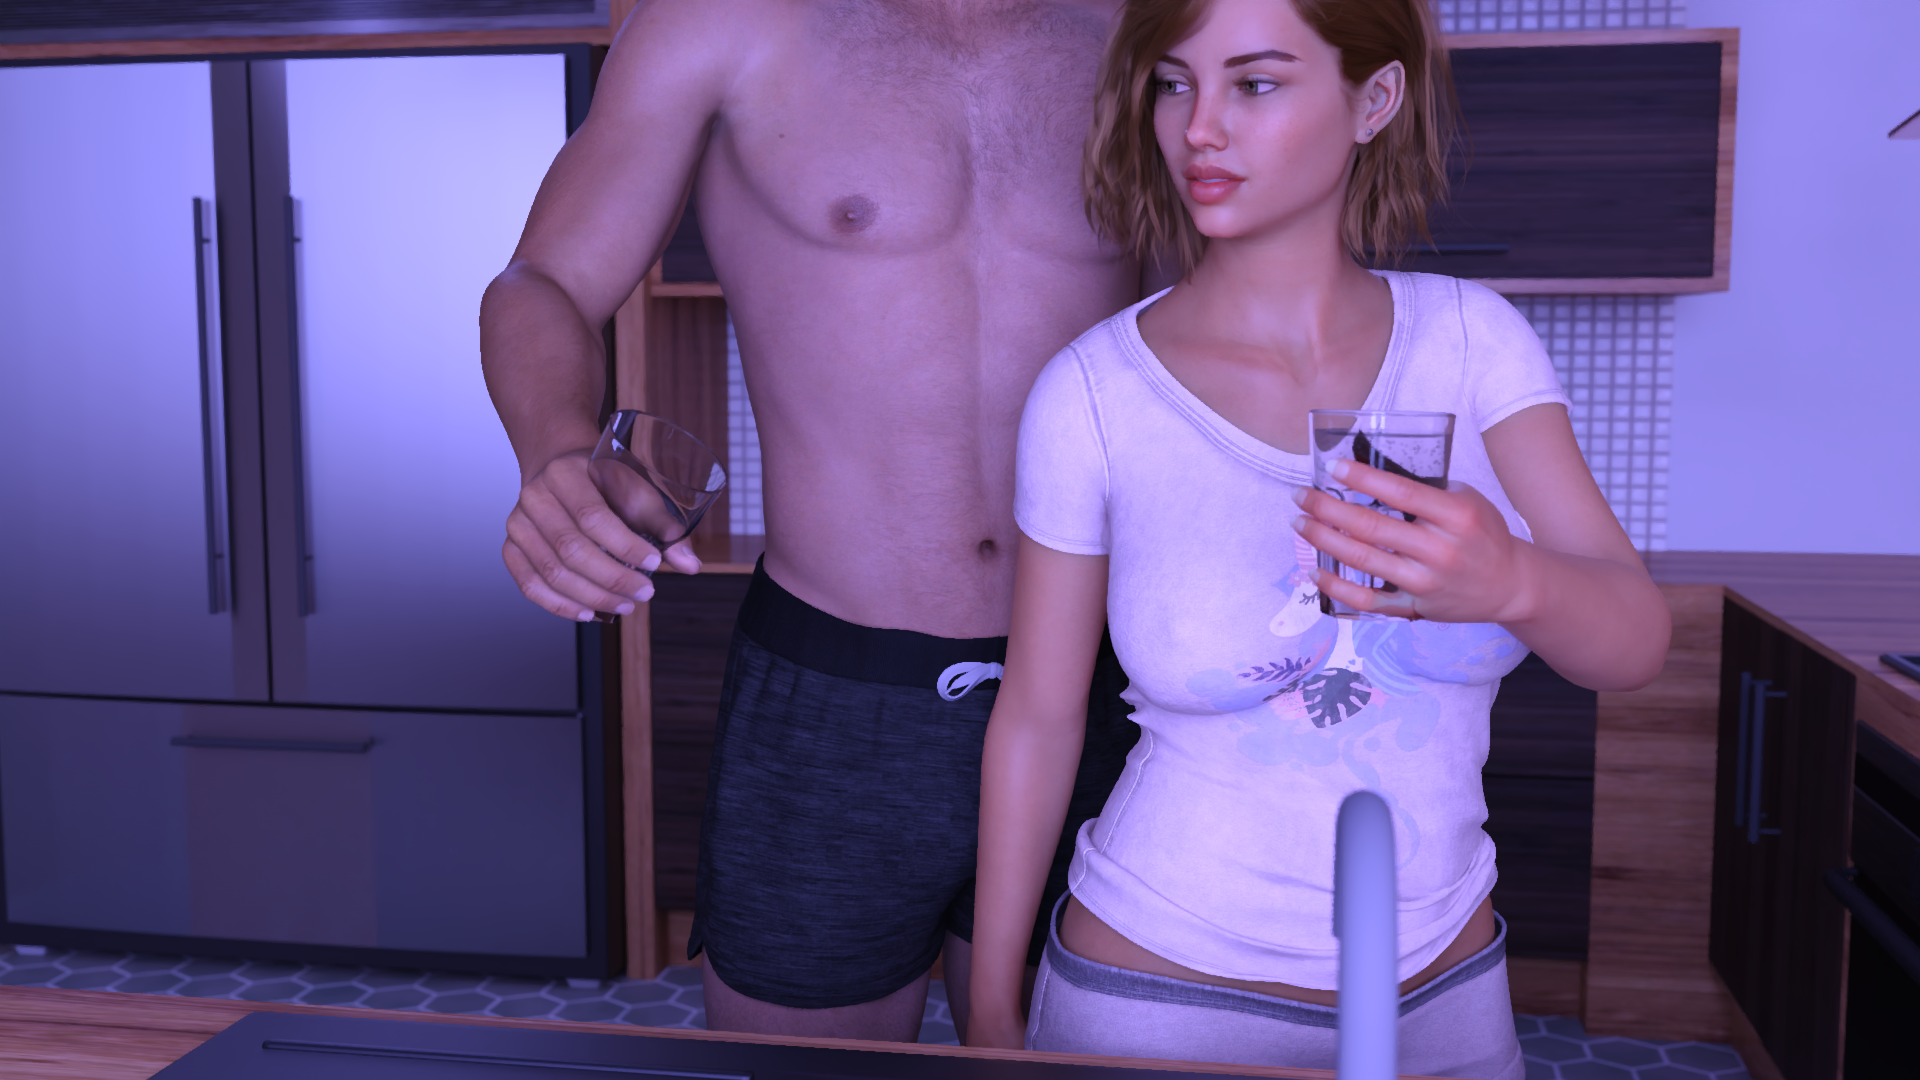 The Other Woman - free game download, reviews, mega - xGames